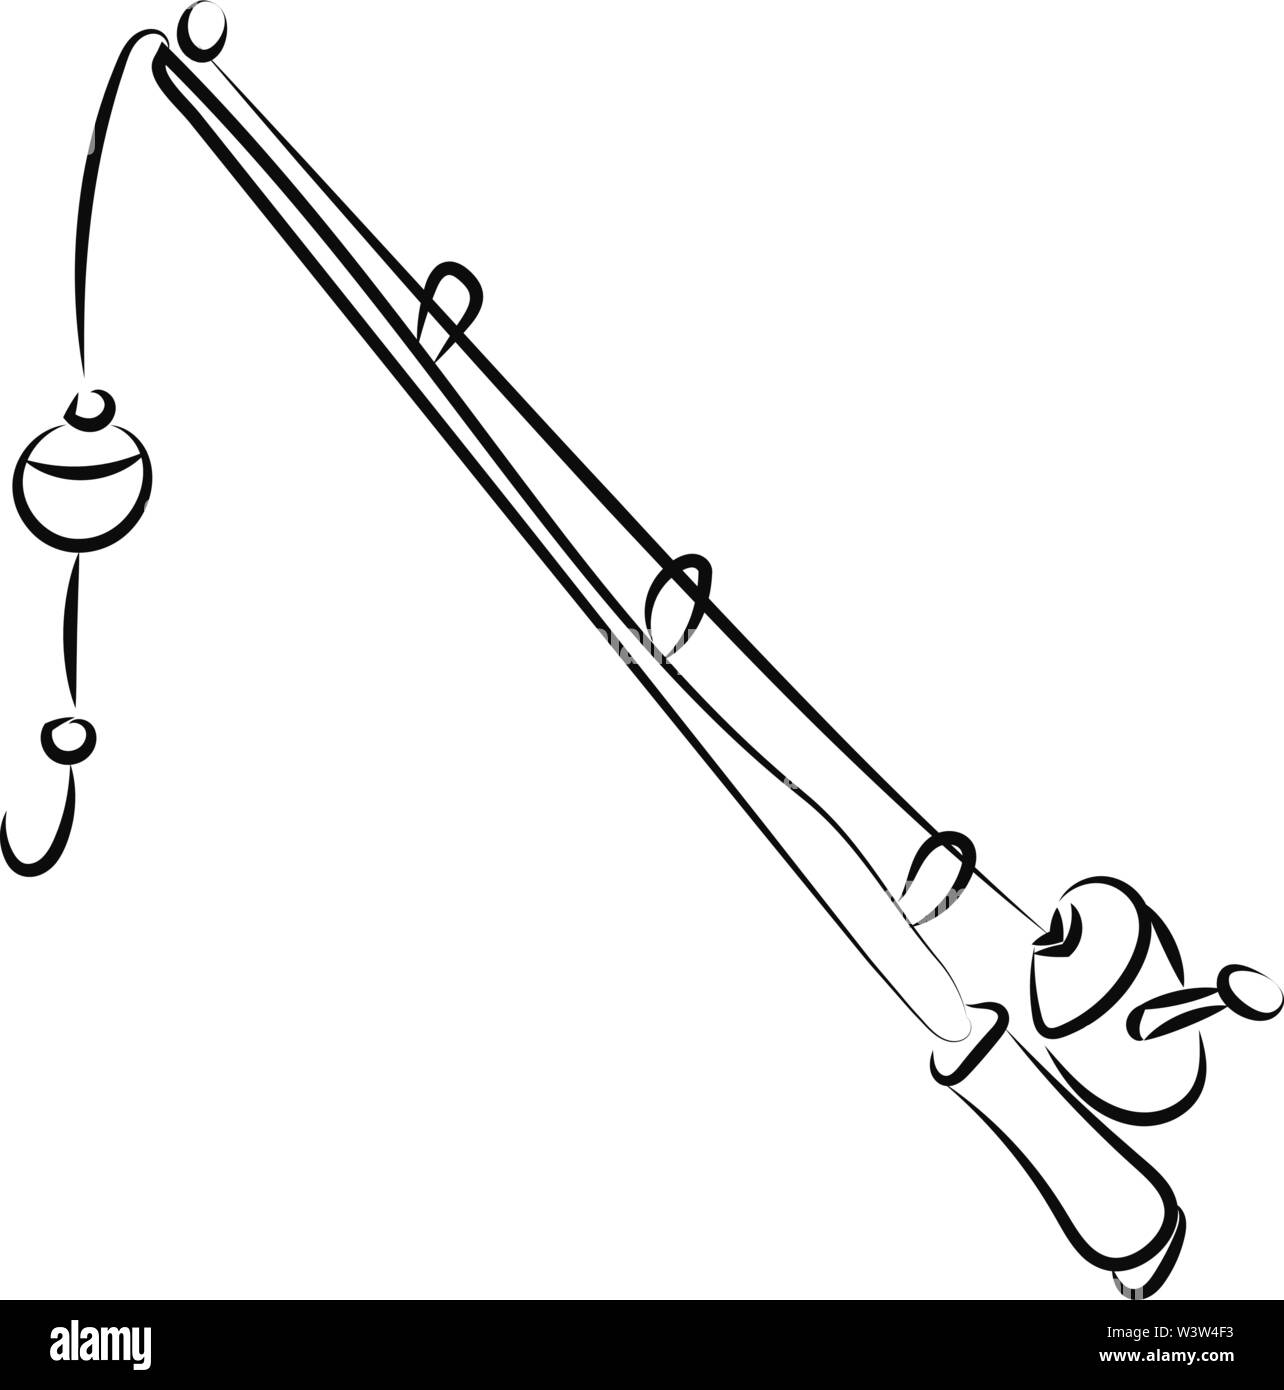 Fishing rod drawing, illustration, vector on white background Stock Vector  Image & Art - Alamy